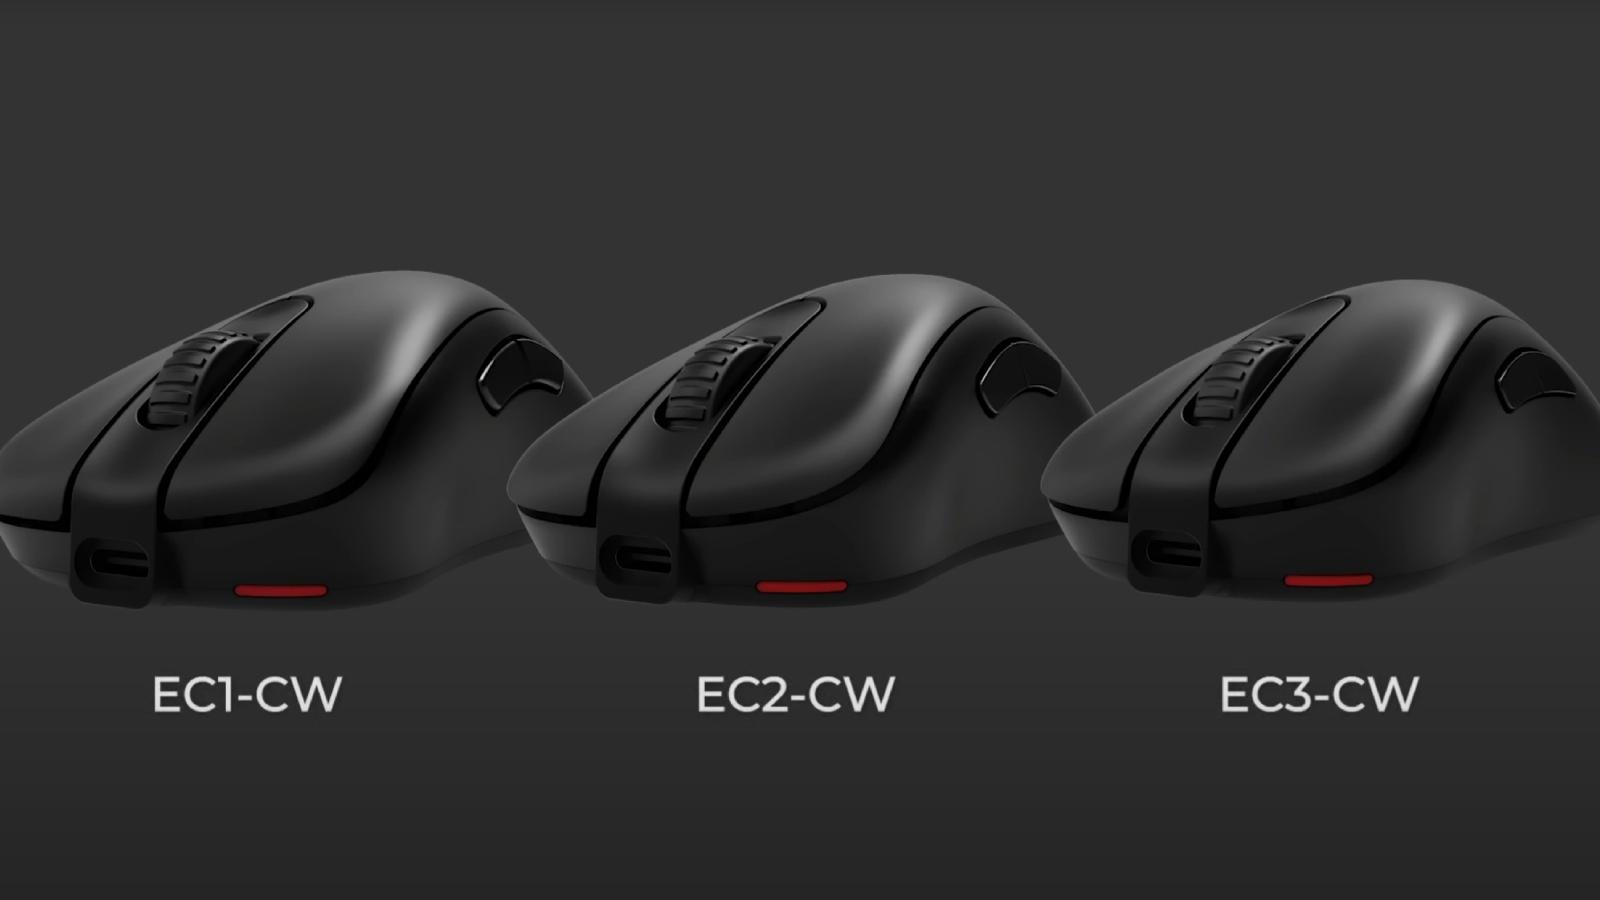 EC-CW Zowie Wireless gaming mouse